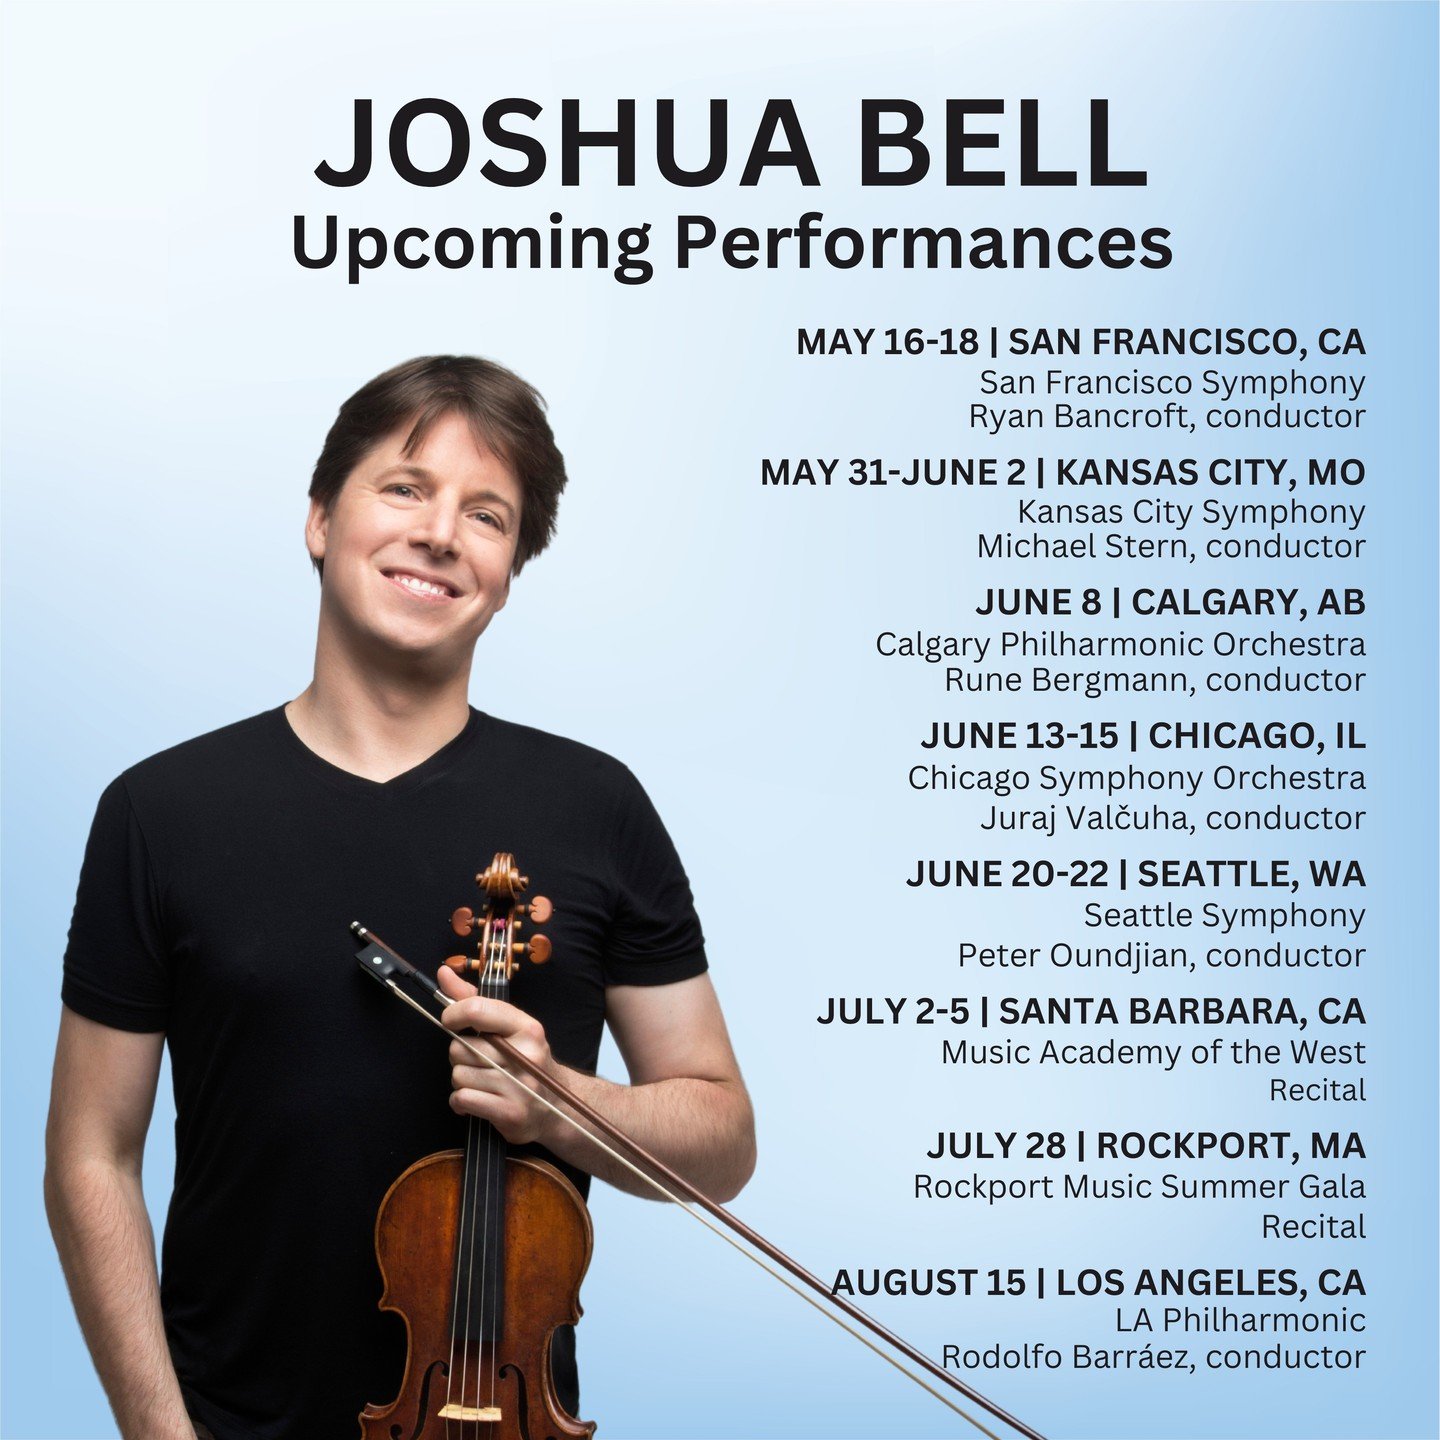 @JoshuaBellMusic performs from coast to coast this summer! He joins 6 orchestras as soloist and plays recitals in California and Massachusetts.

May 16-18 : San Francisco | @SFSymphony
May 31- June 2: Kansas City | @KCSymphony
June 8: Calgary | @Calg